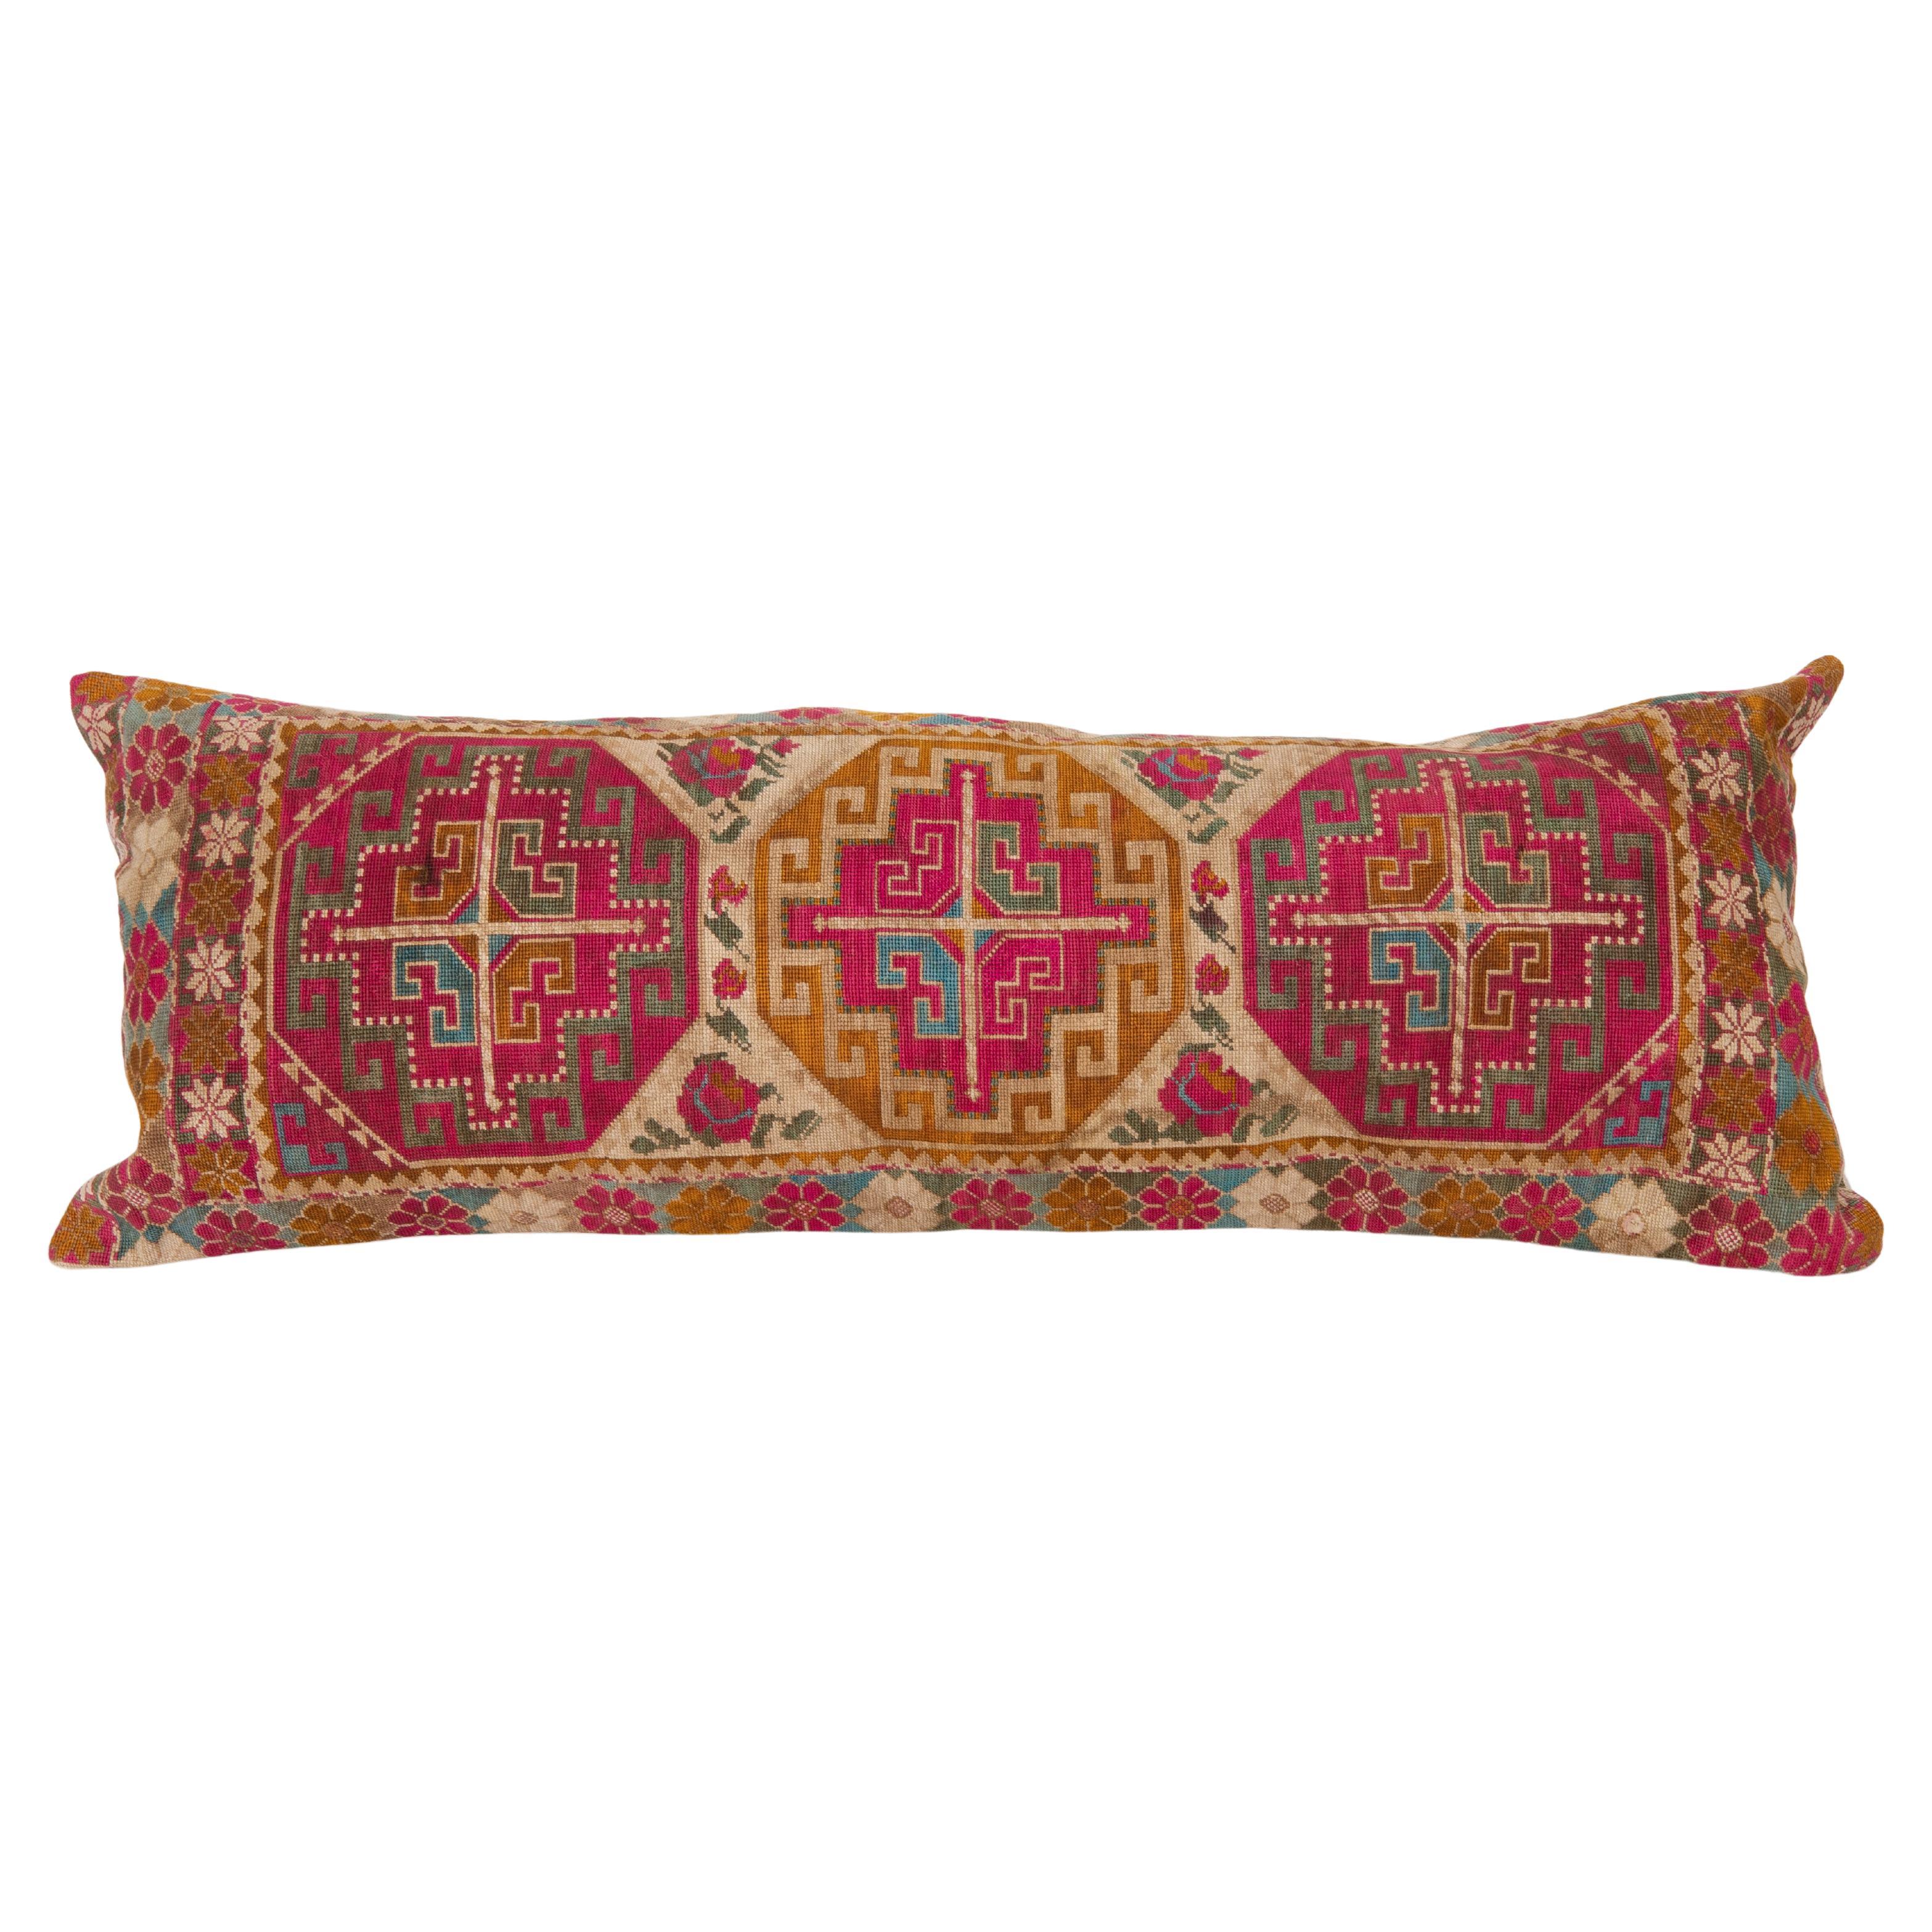 Pillow Cover, Made from a 1970s/80s silk mafrash ( storage bag ) Panel For Sale